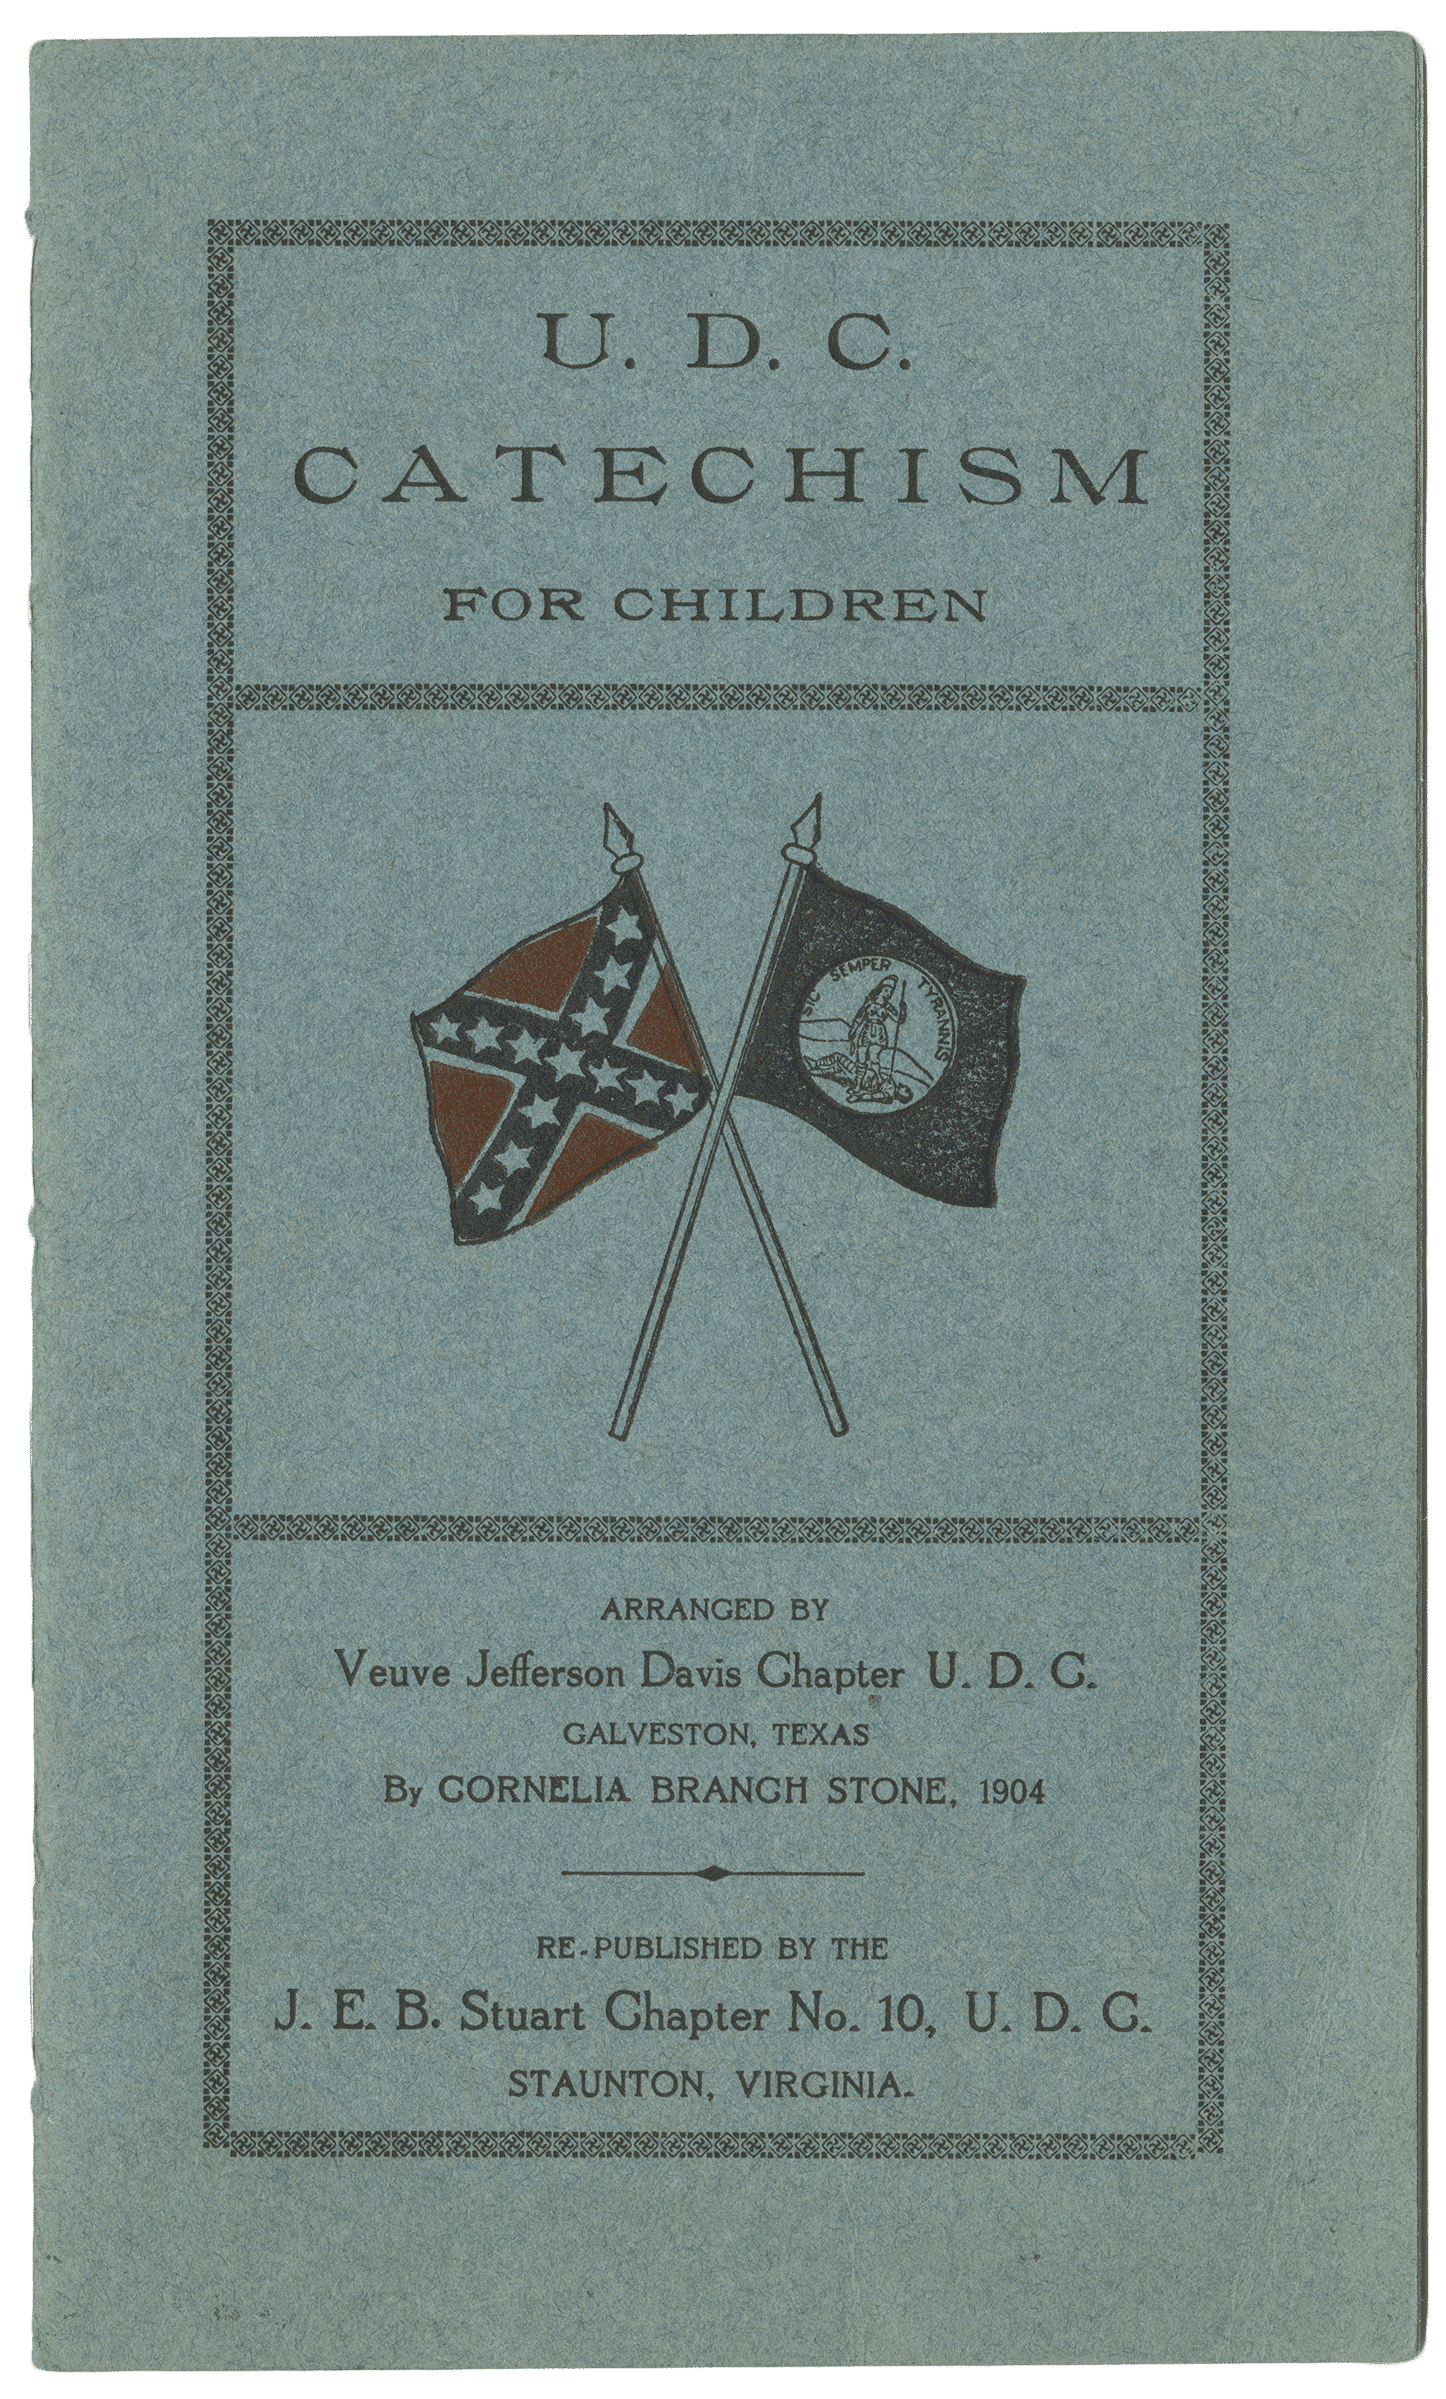 Blue colored booklet decorated with Confederate and United Daughters of the Confederacy flags entitled "U.D.C Catechism for Children"